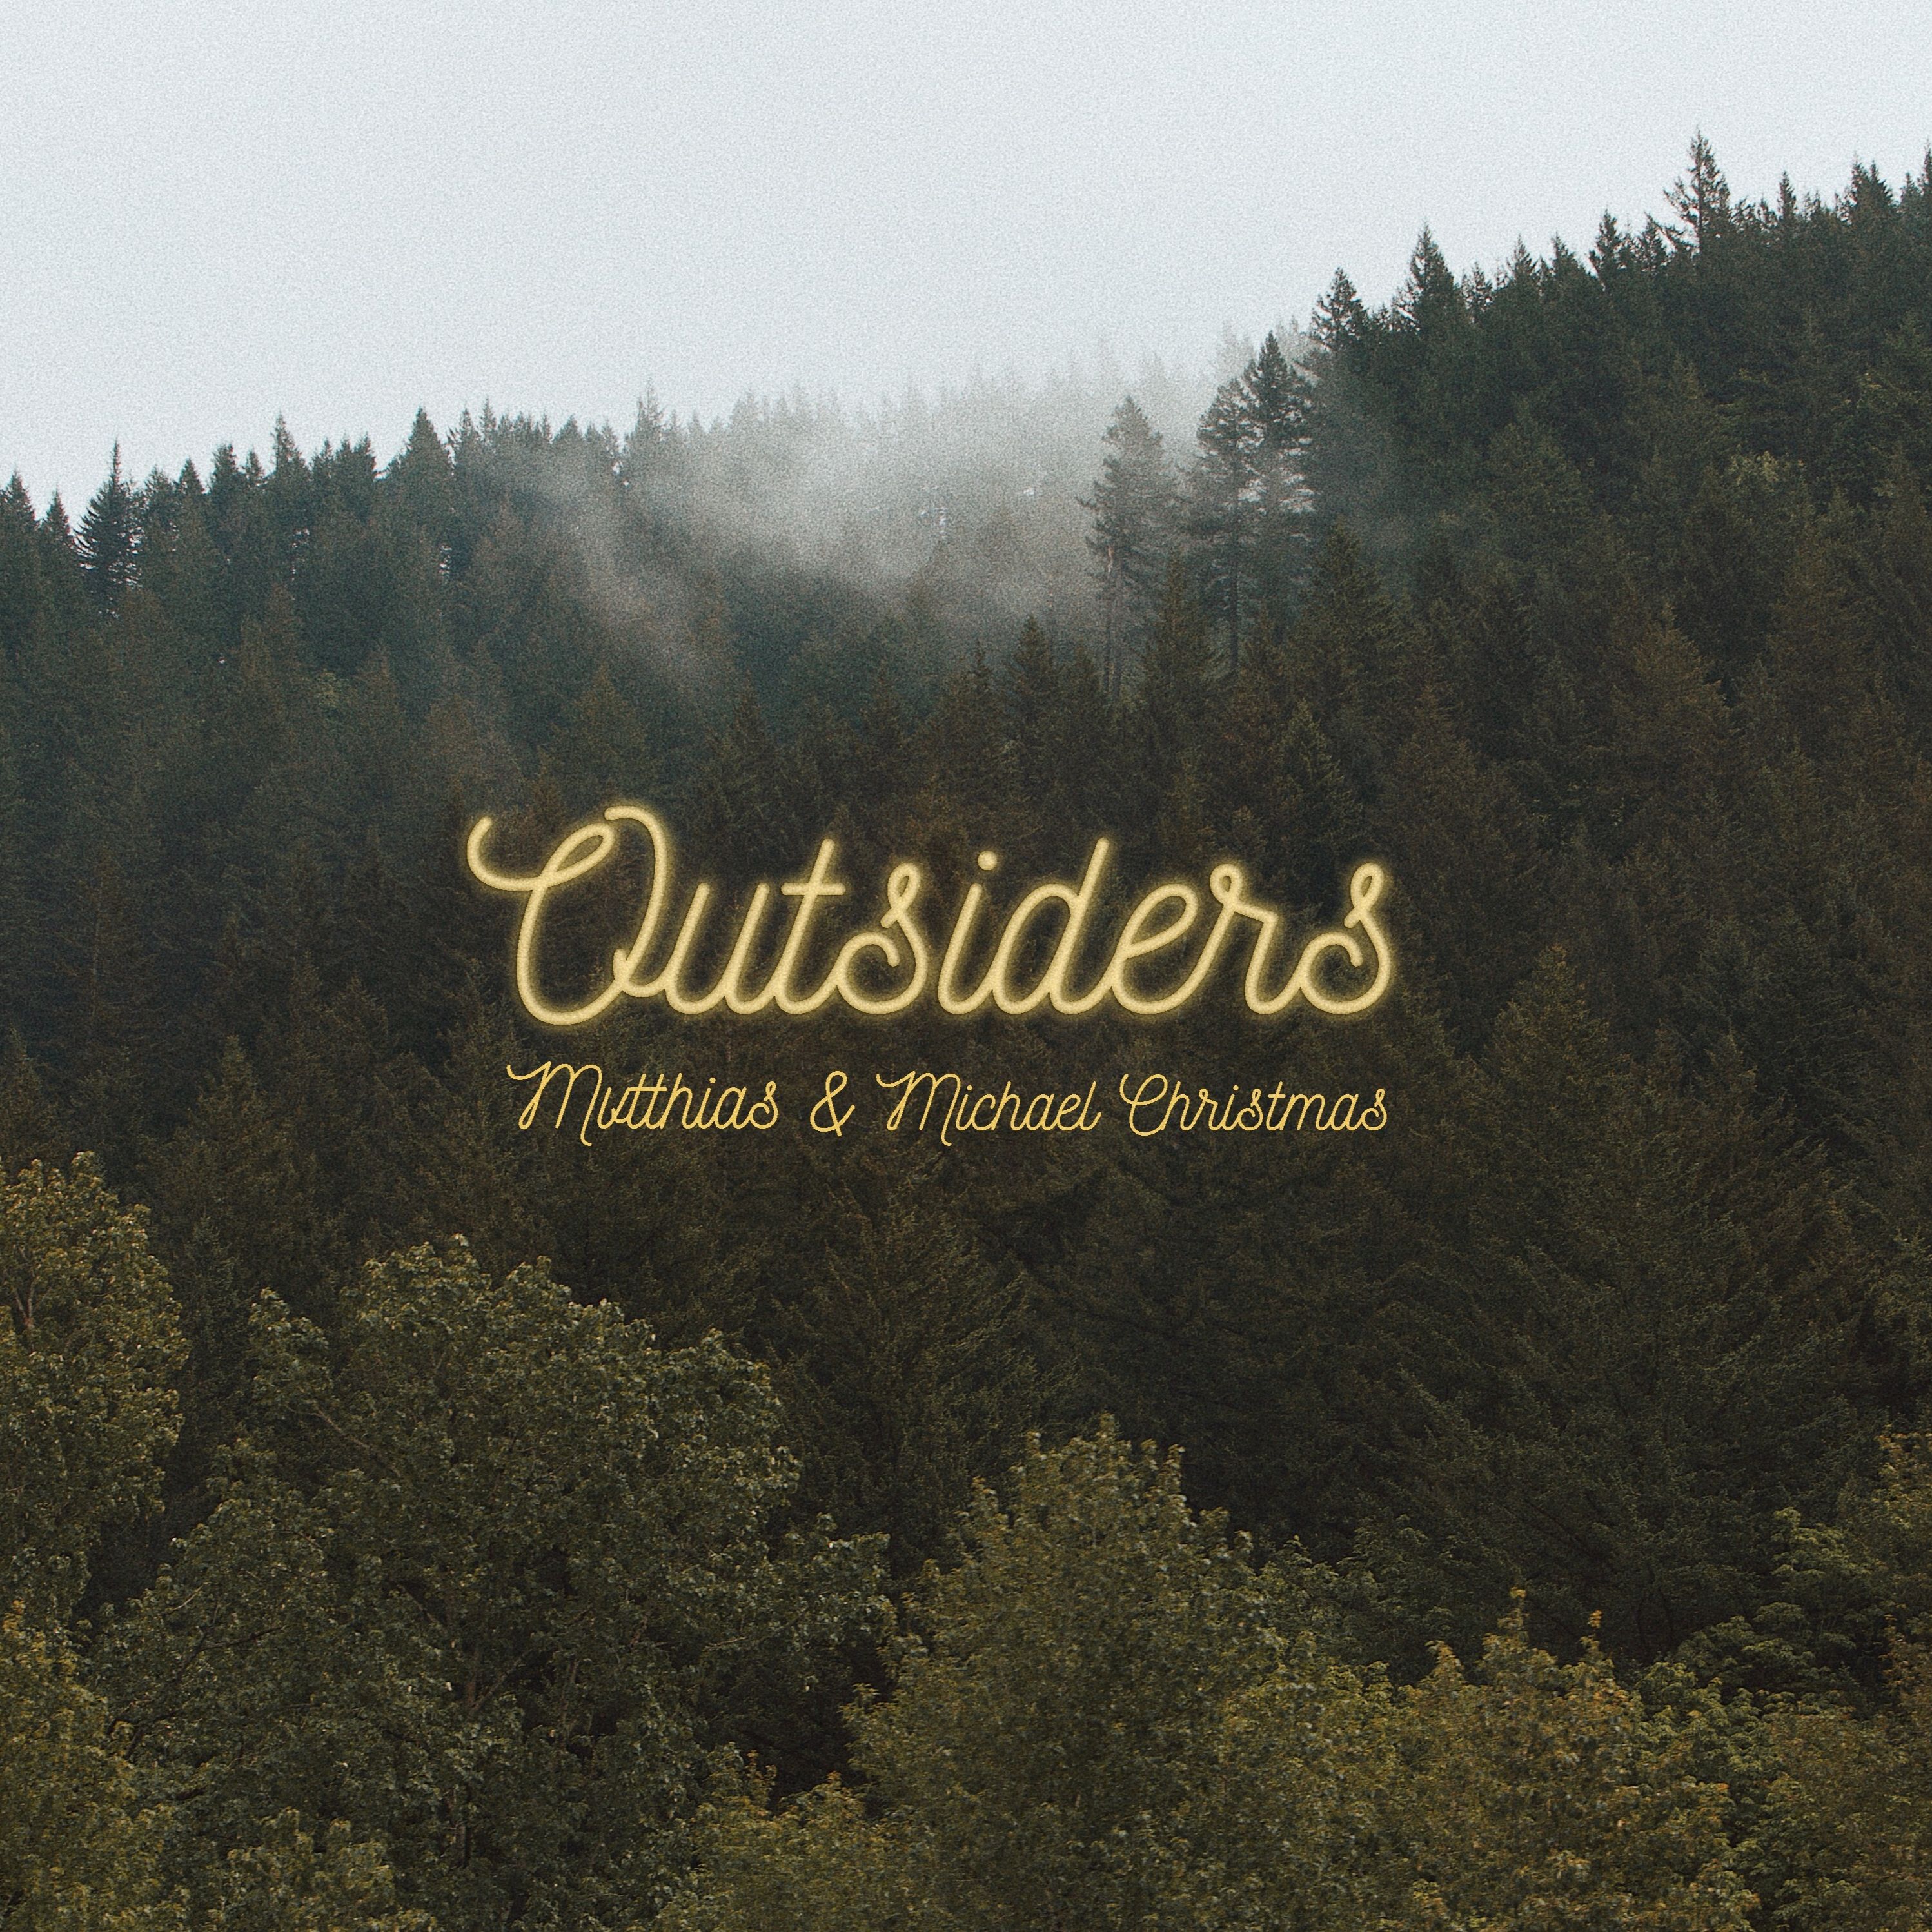 MVTTHIAS's cover art for 'Outsiders' featuring Michael Christmas